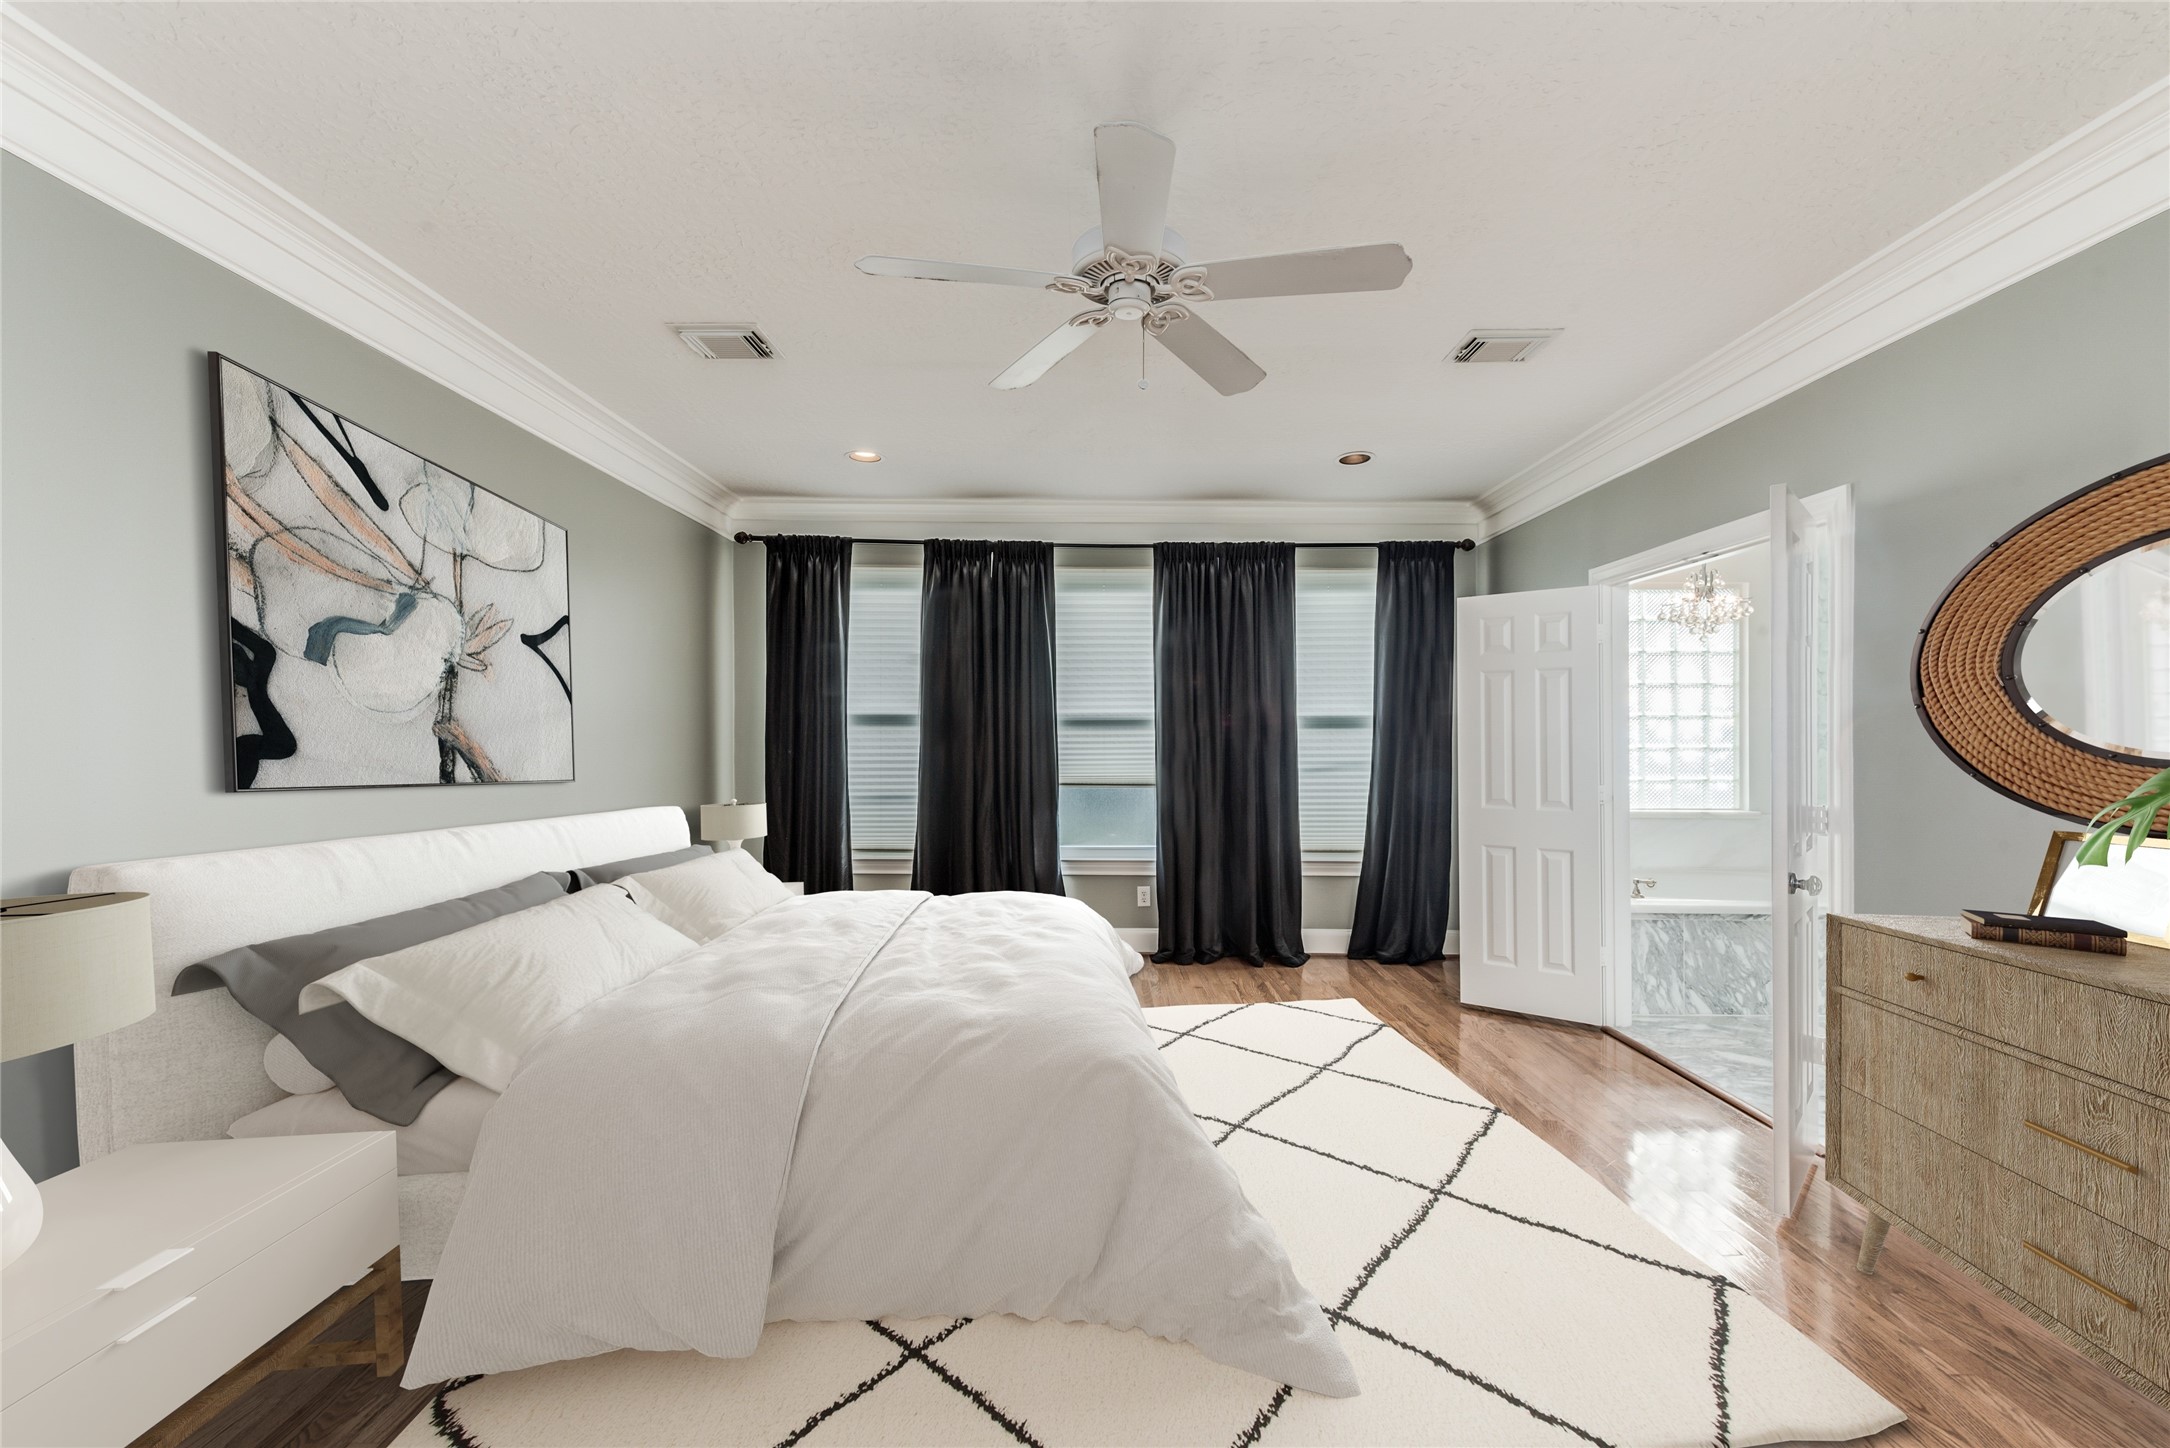 Updated 3 bedroom, 3.5 bath custom townhome built by Doyle Stuckey Homes in gated Park at Post Oak. Home has hardwood flooring, 10 and 11 foot ceilings and crown moulding throughout.